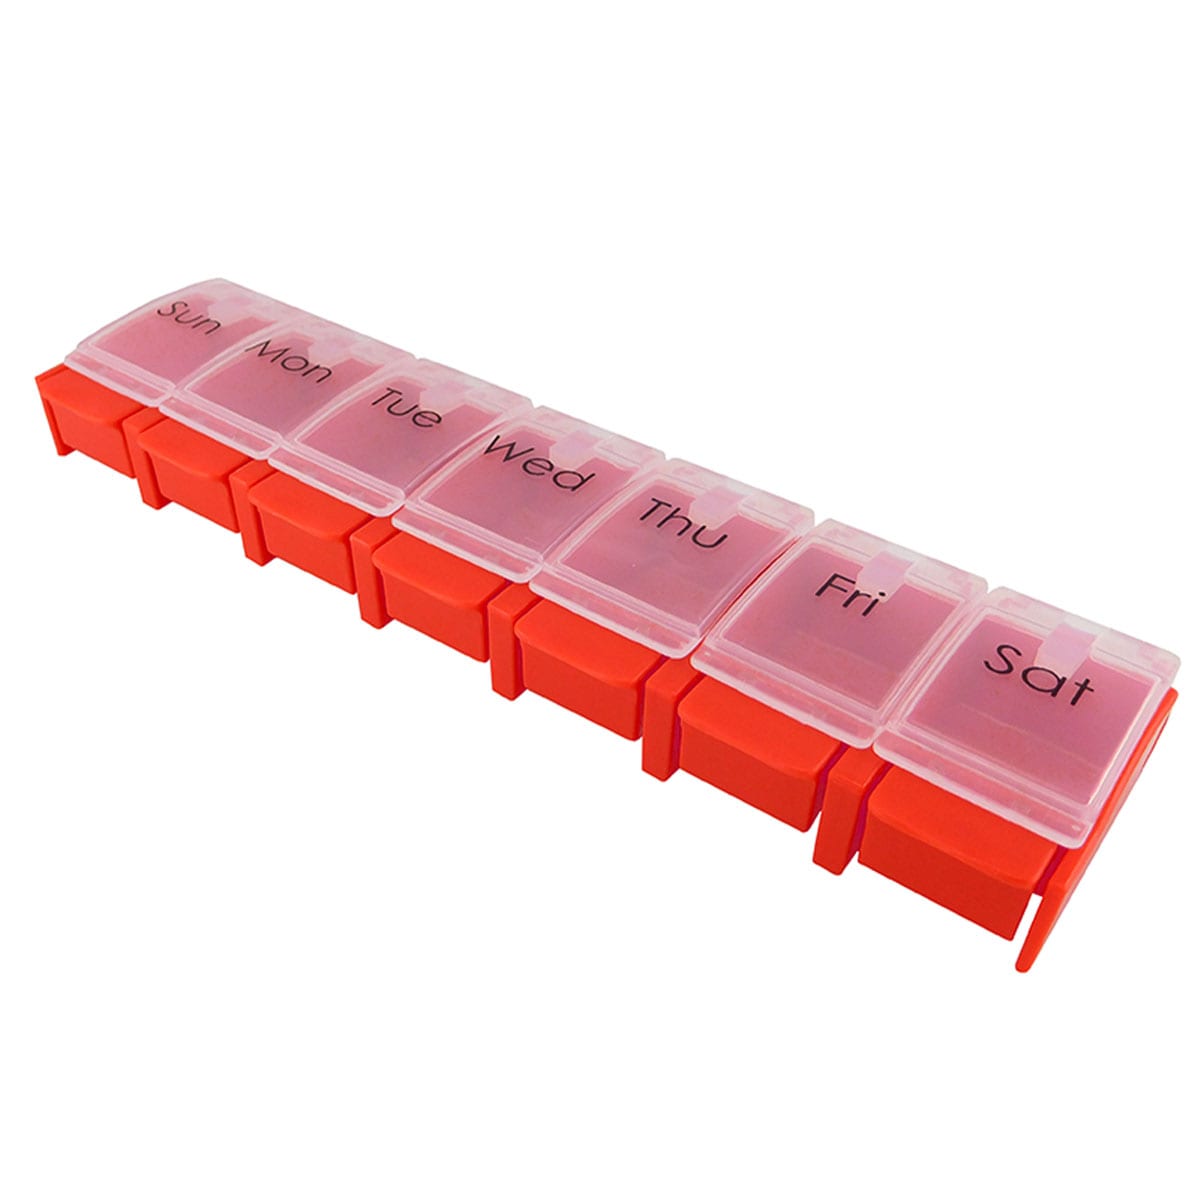 Surgical Basics One a Day Weekly Pill Organiser Large 1 Pack (Colours selected at random)